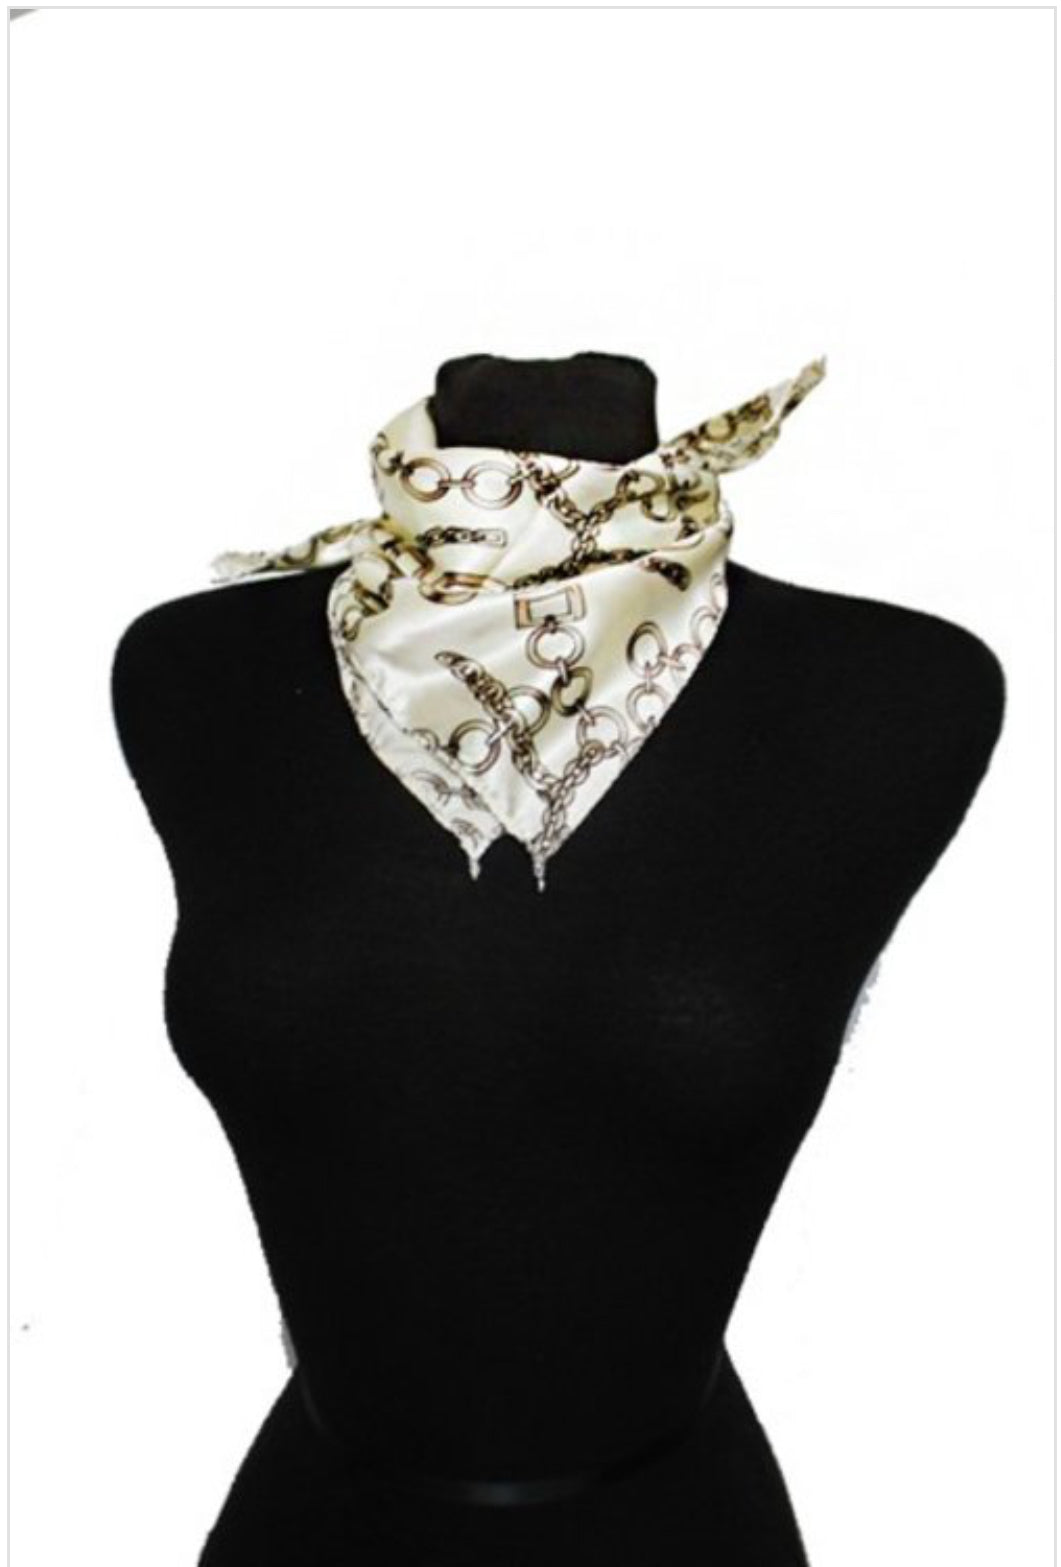 Abstract Rustic Link Chain Scarf